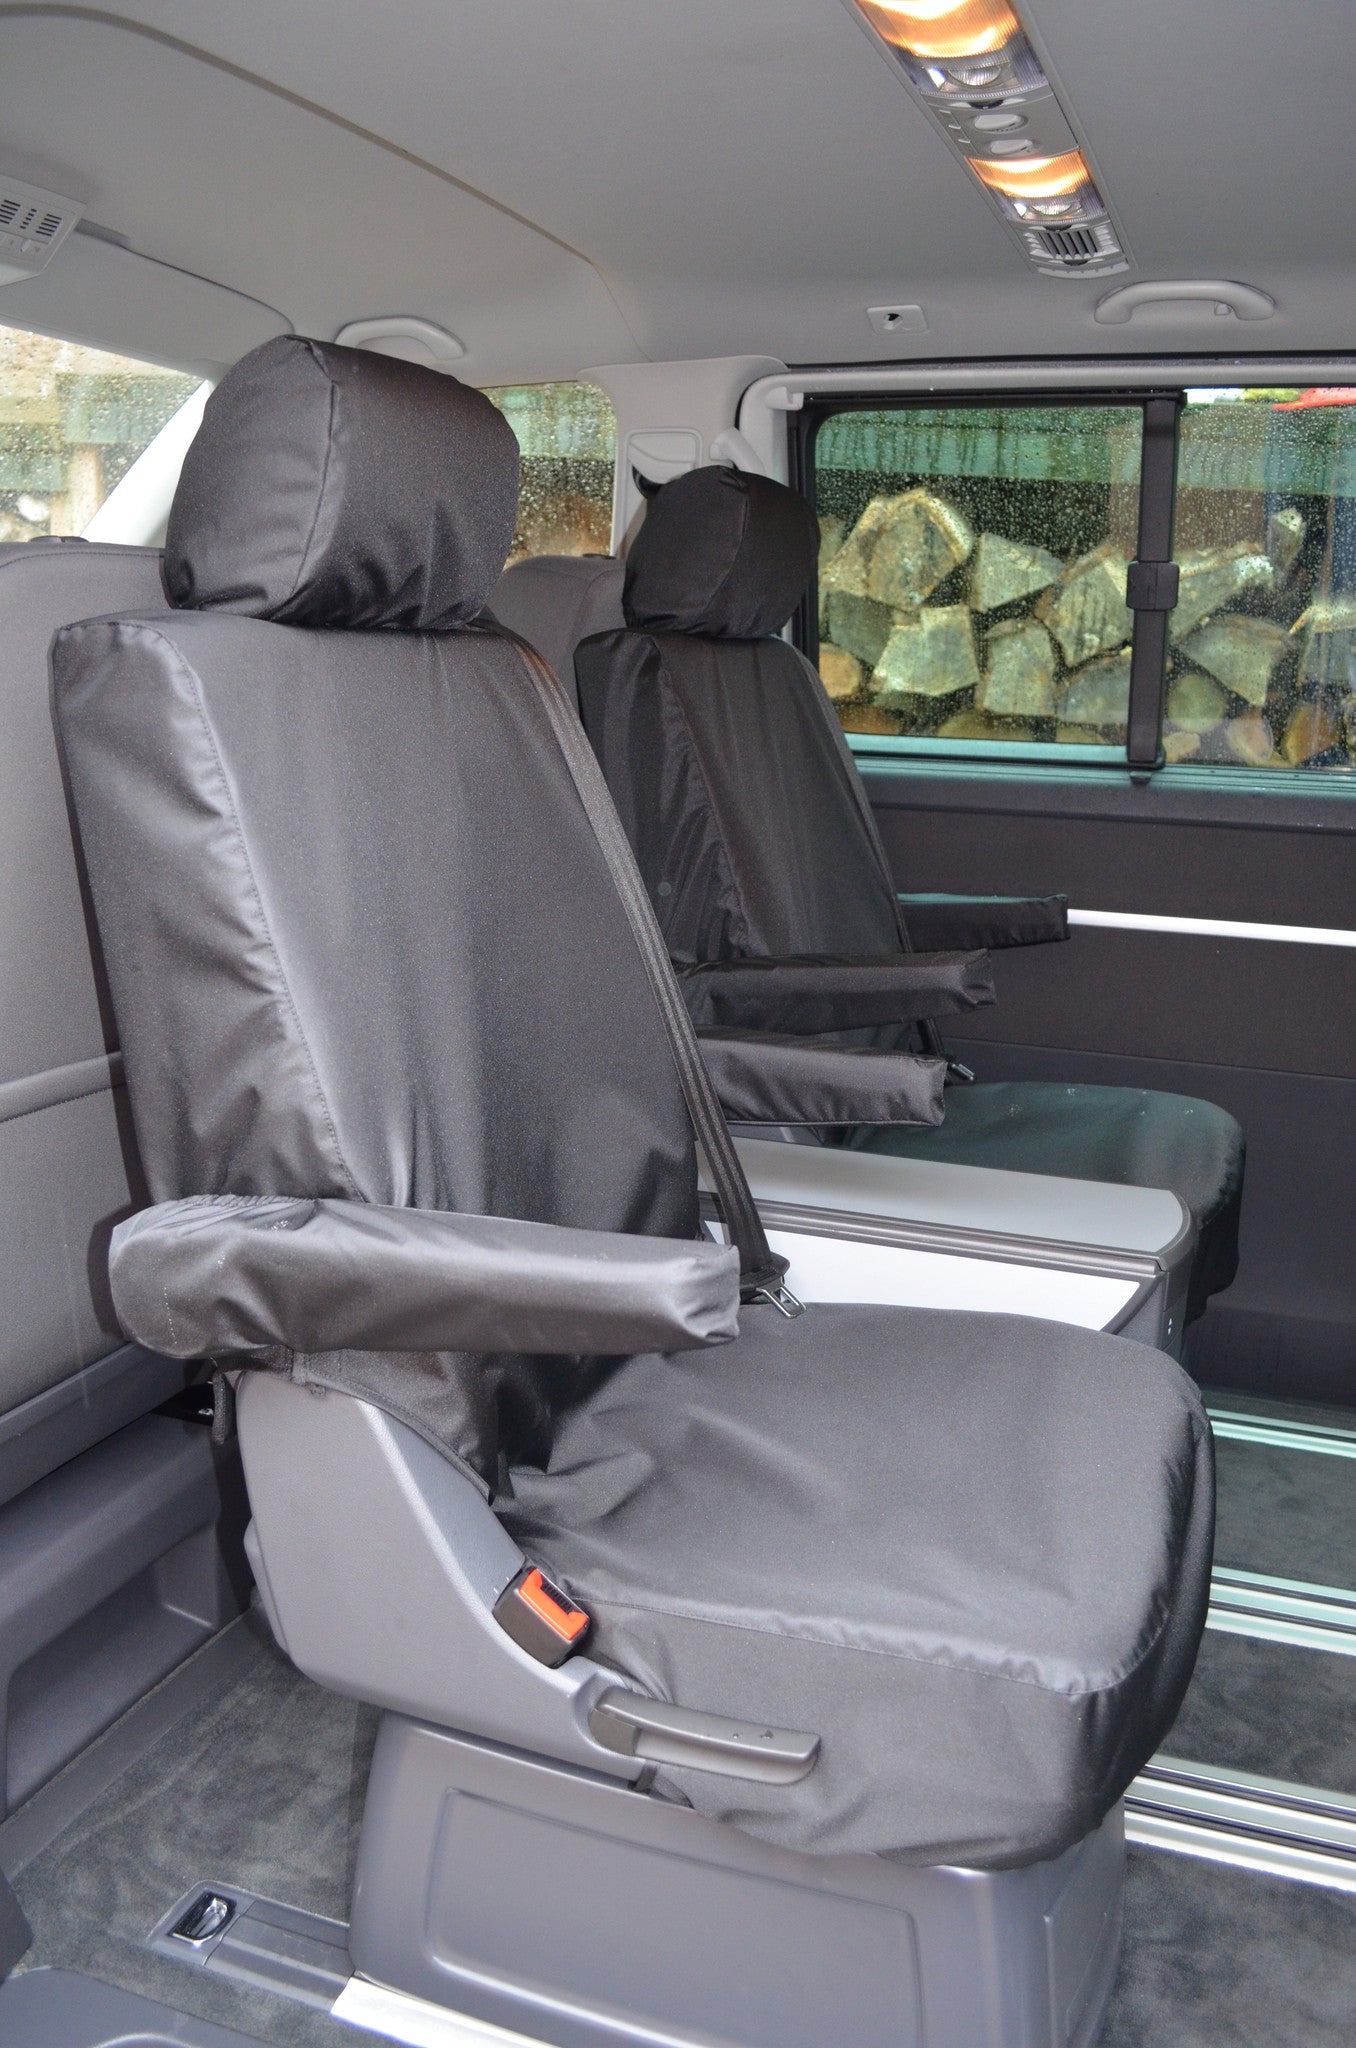 VW Volkswagen T5 Caravelle 2003 - 2015 Tailored Seat Covers Rear Pair of Singles / Black Turtle Covers Ltd